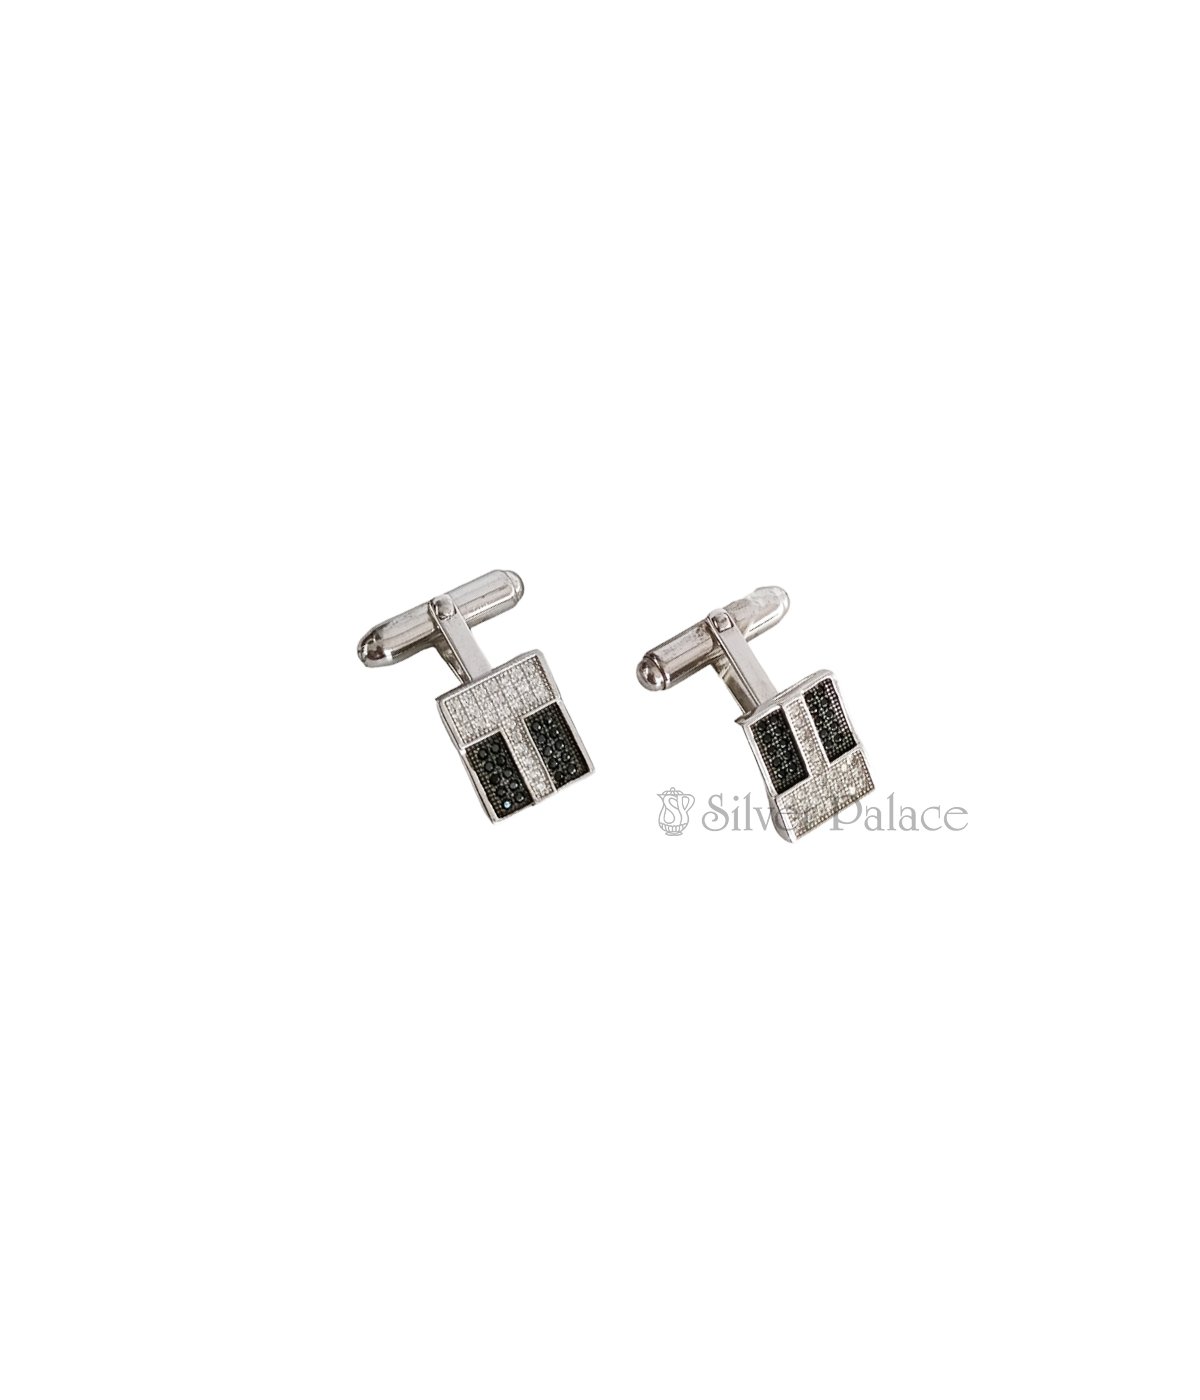 RHODIUM SILVER BLACK AND WHITE BLACK STONE CUFFLINKS FOR GENTS CORPORATE GIFTS